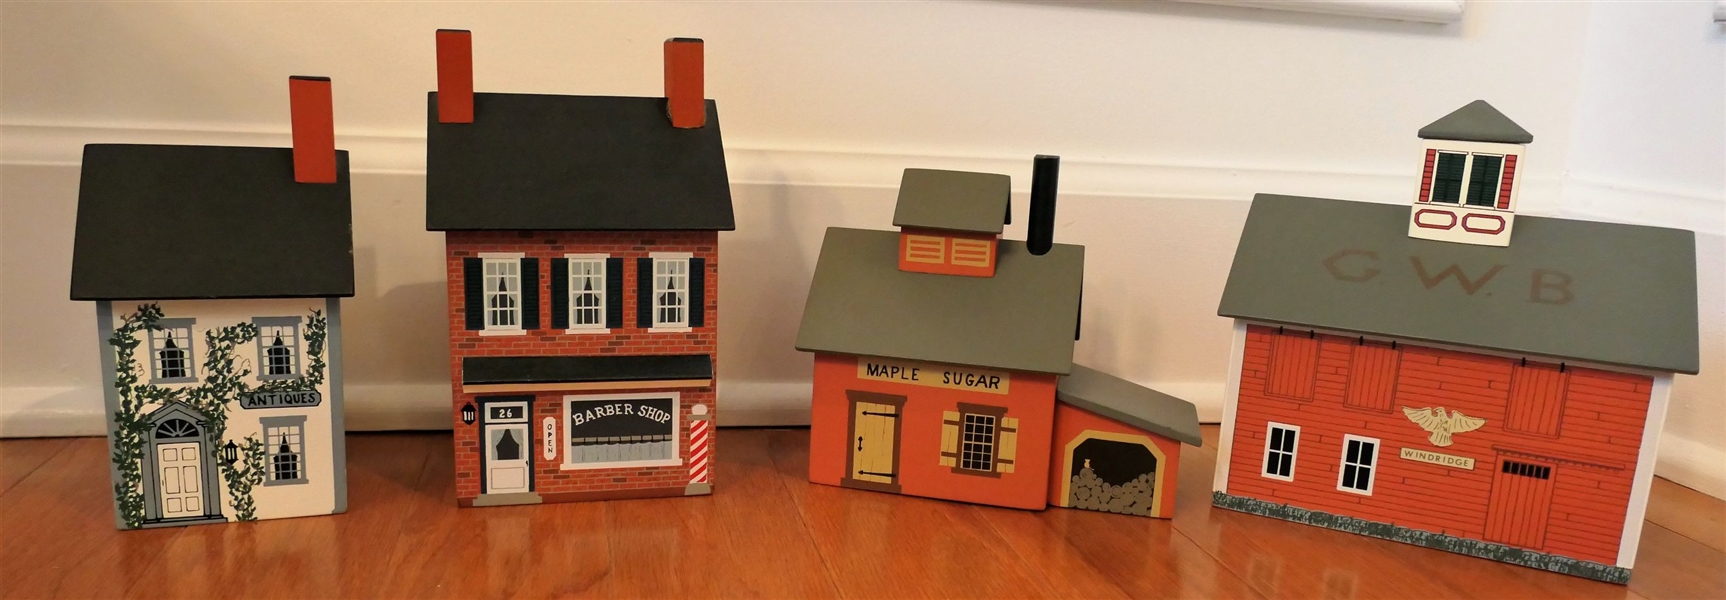 4 Windfield Designs New York - Wood Building Banks - "Barber Shop" "1316 Barn" "Maple Sugar" and "Antiques" - Barn Measures 7" tall 7" by 5 1/4"